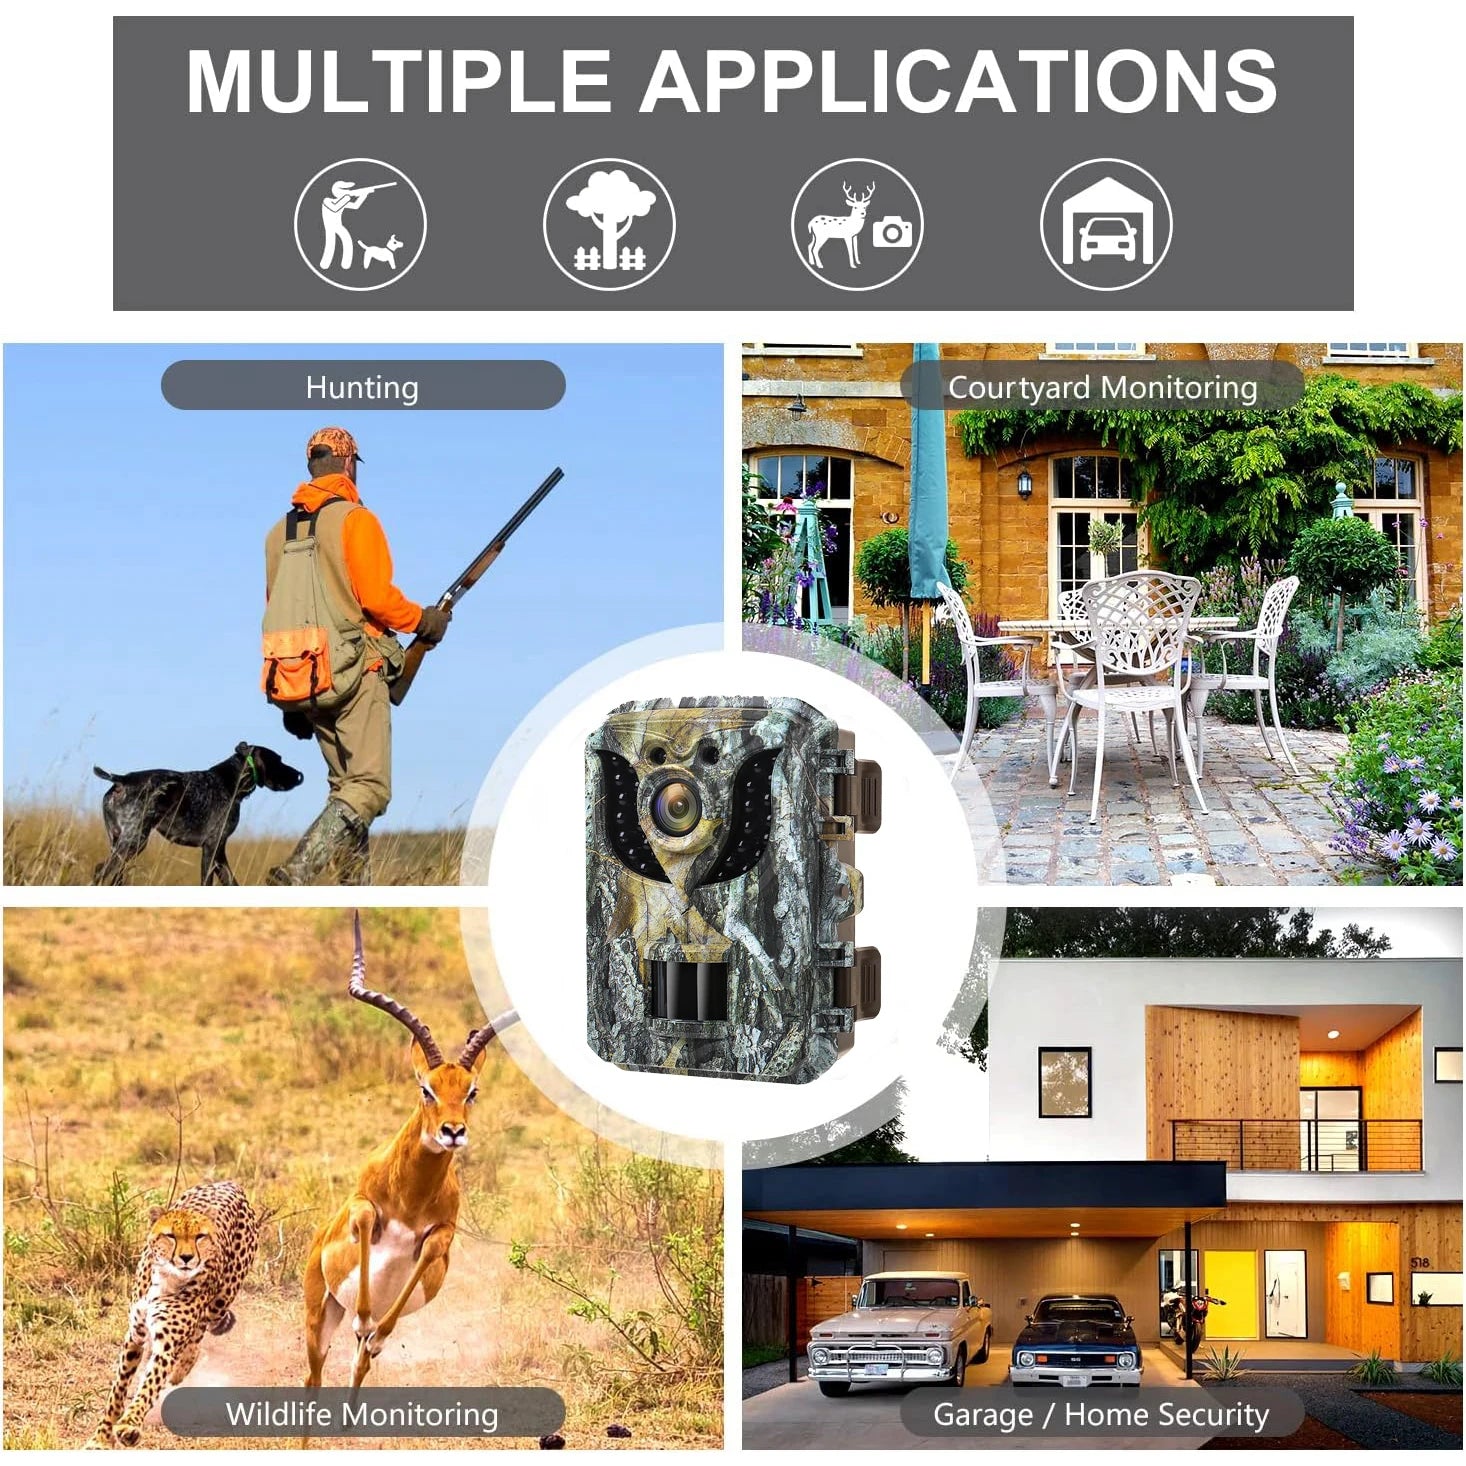 Versatile wildlife camera with camouflage design, ideal for hunting, wildlife monitoring, and home security, showcased in a collage with images of a hunter, cheetah, antelope, a furnished courtyard, and a modern house.